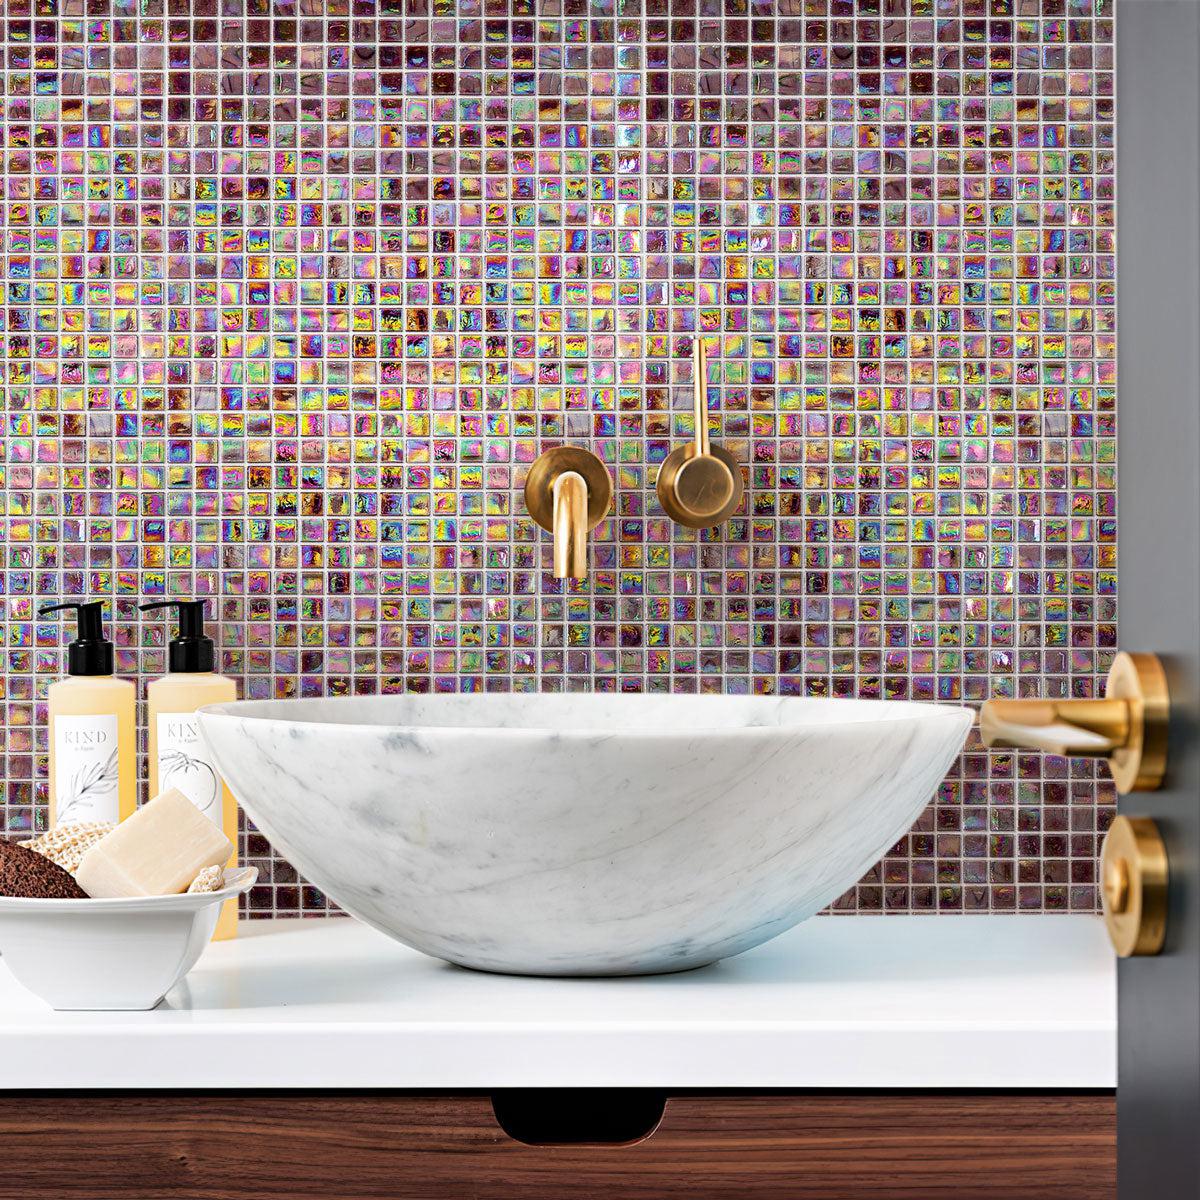 The bathroom shines with Pearlescent Oil Slick Squares Glass Tile accents